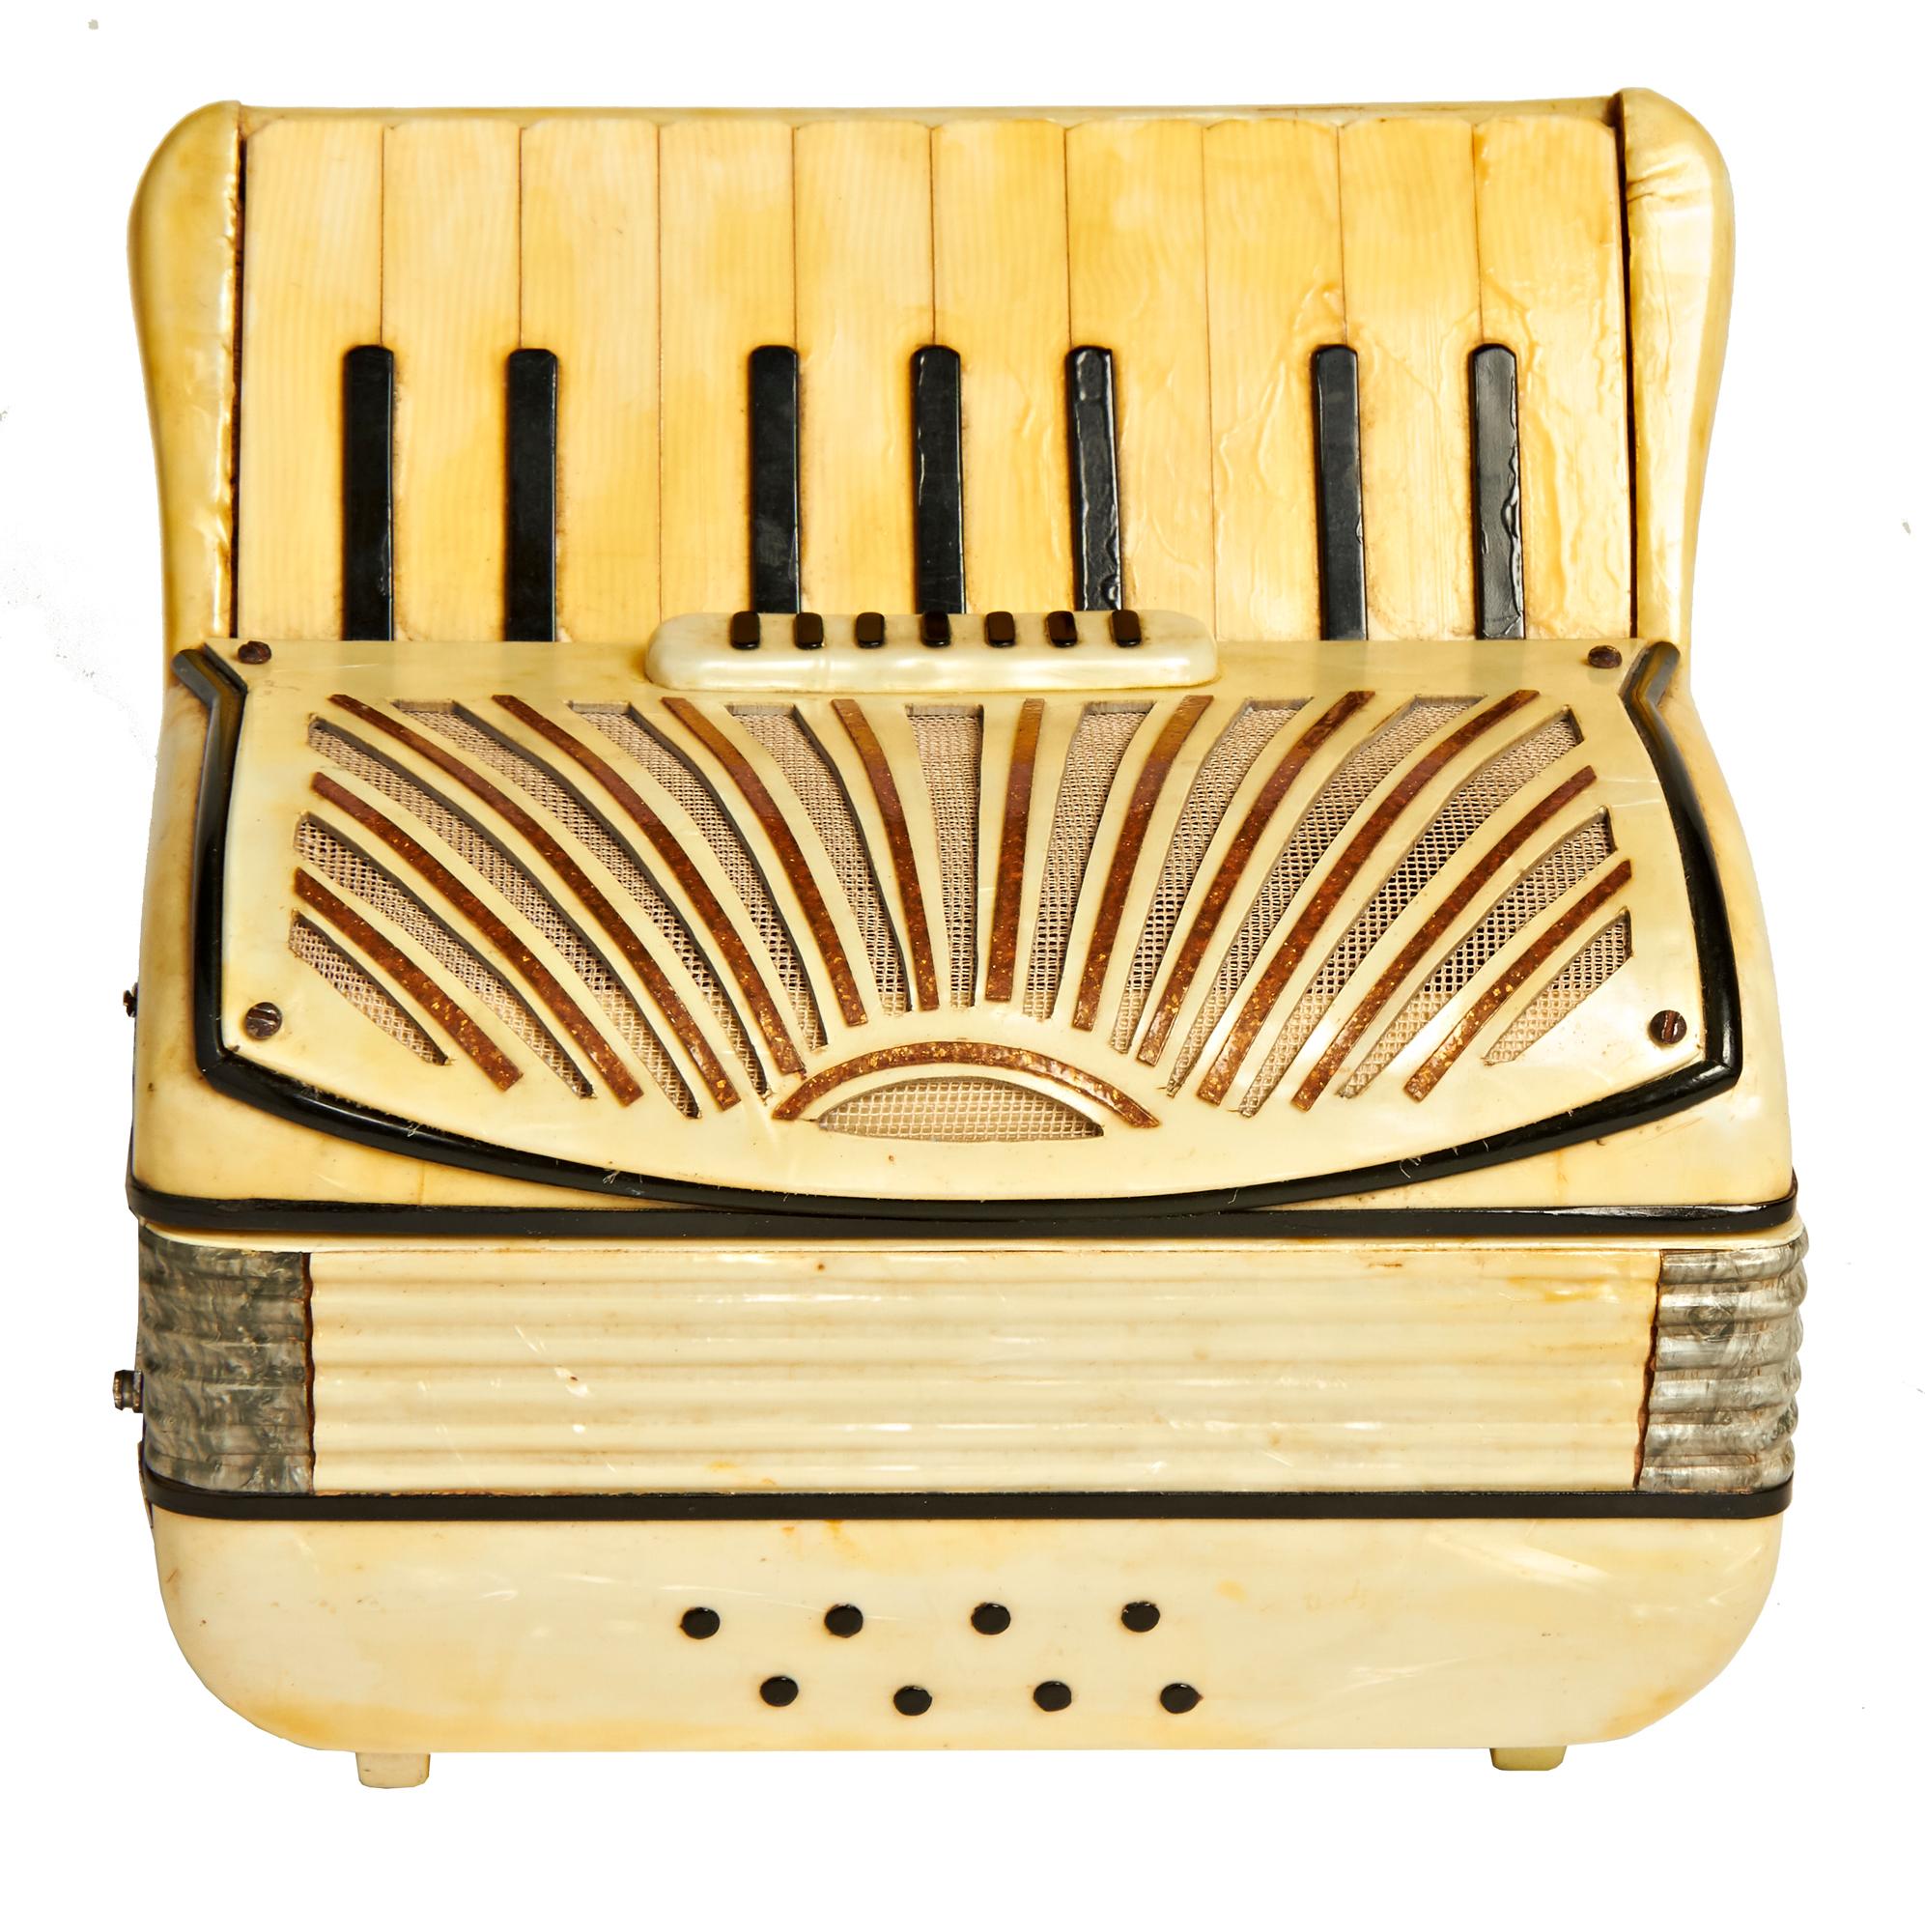 These beautiful Italian Art Deco miniature accordion shaped cigarette boxes open to reveal an interior in blonde highly varnished wood with a fluted and channeled panel set into the lid to hold the cigarettes in place. The exterior of these rare and